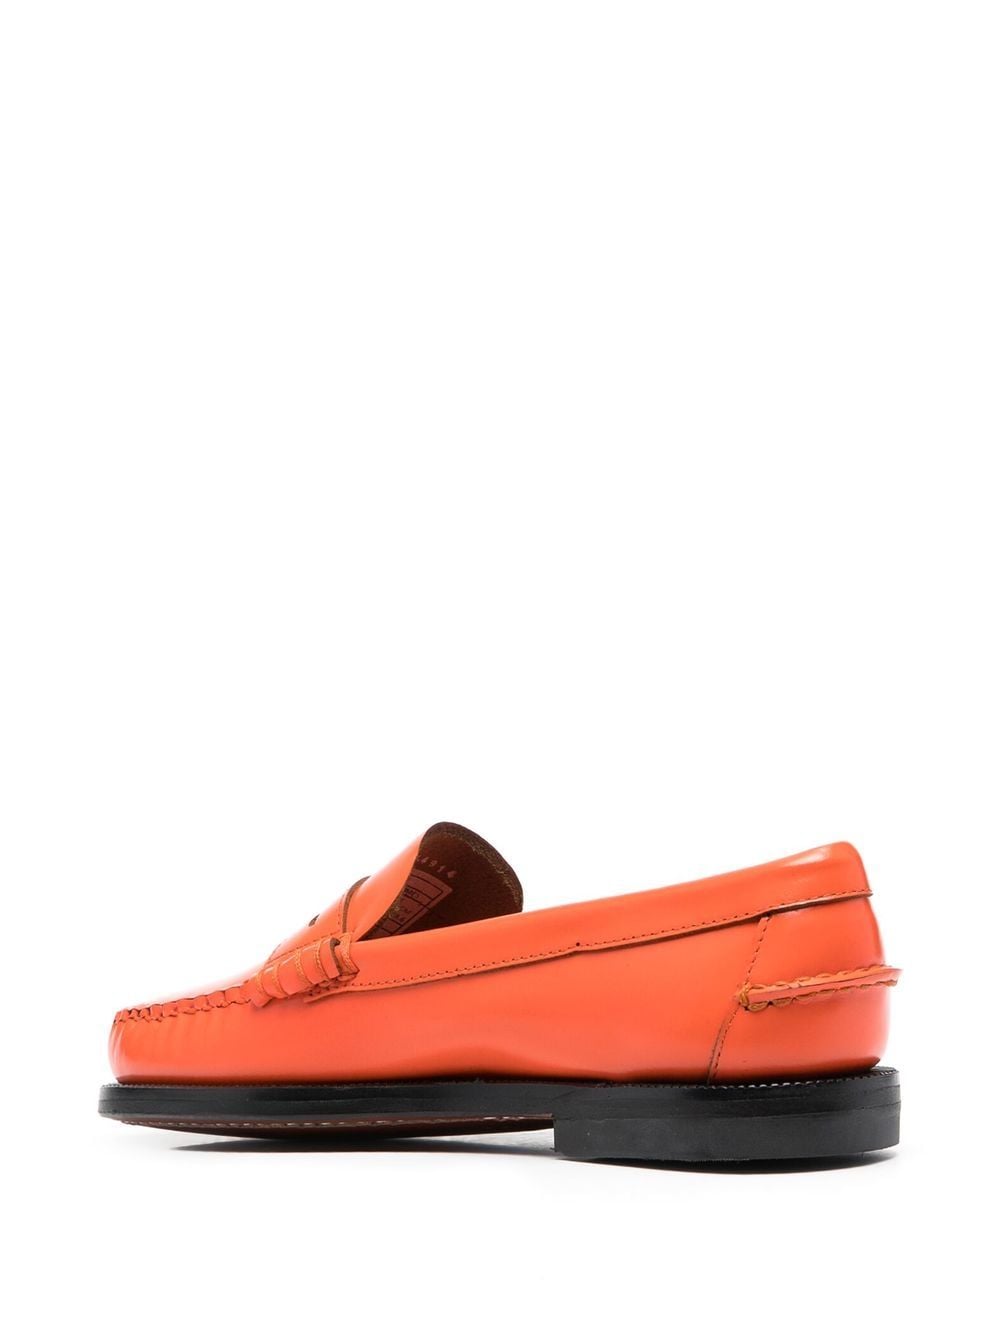 Penny strap leather loafers